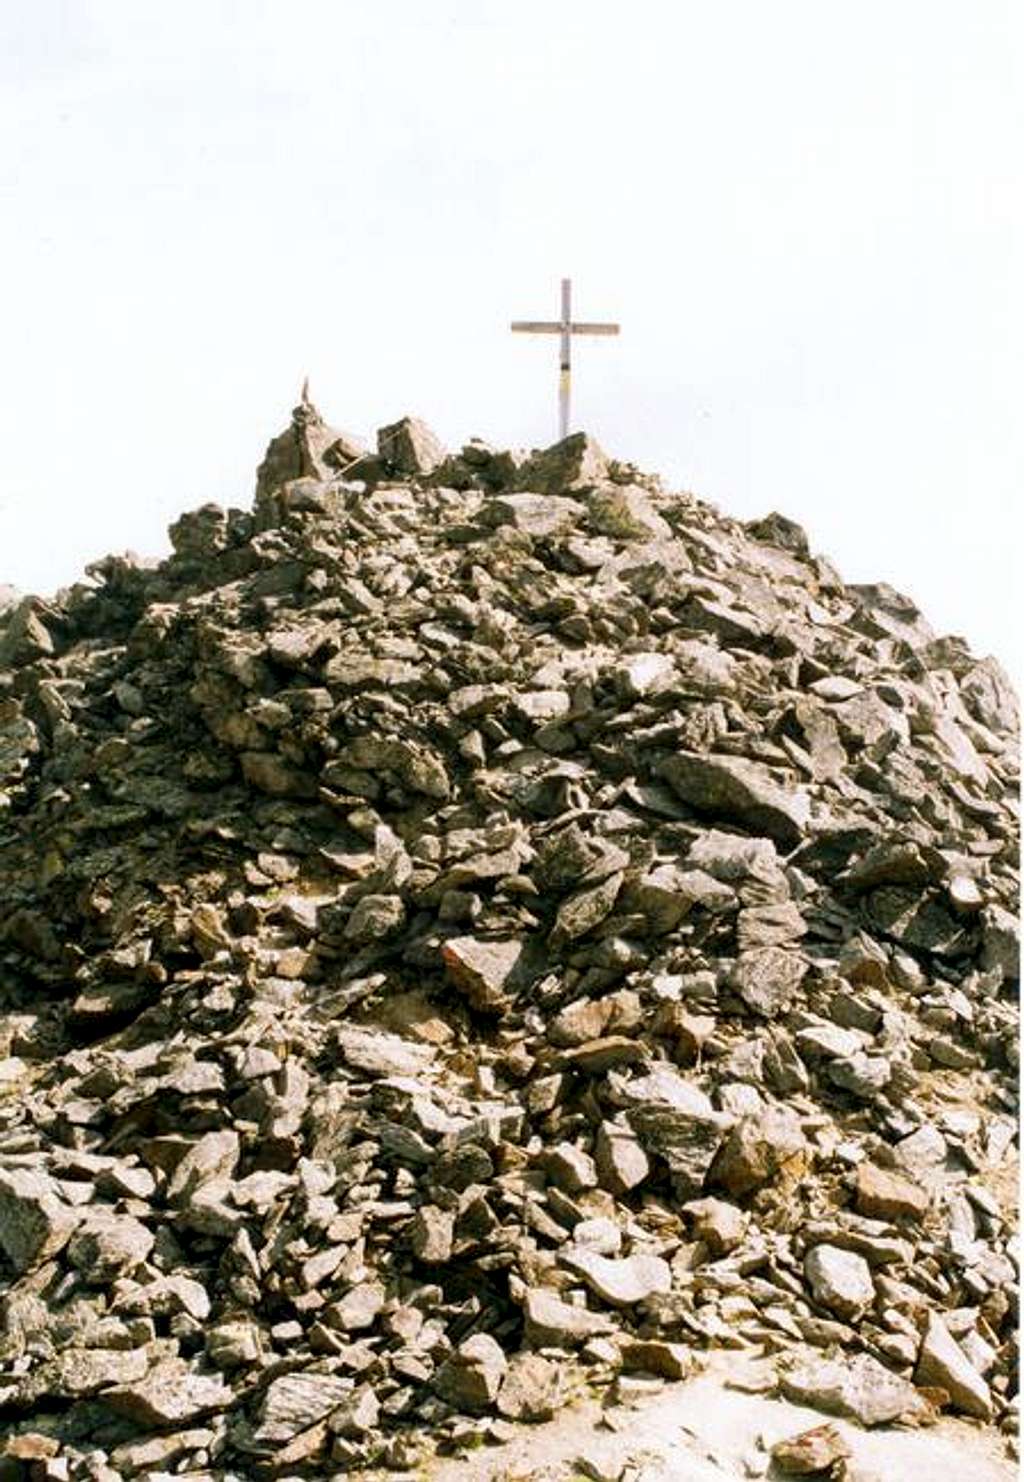 Summit with the Cross.